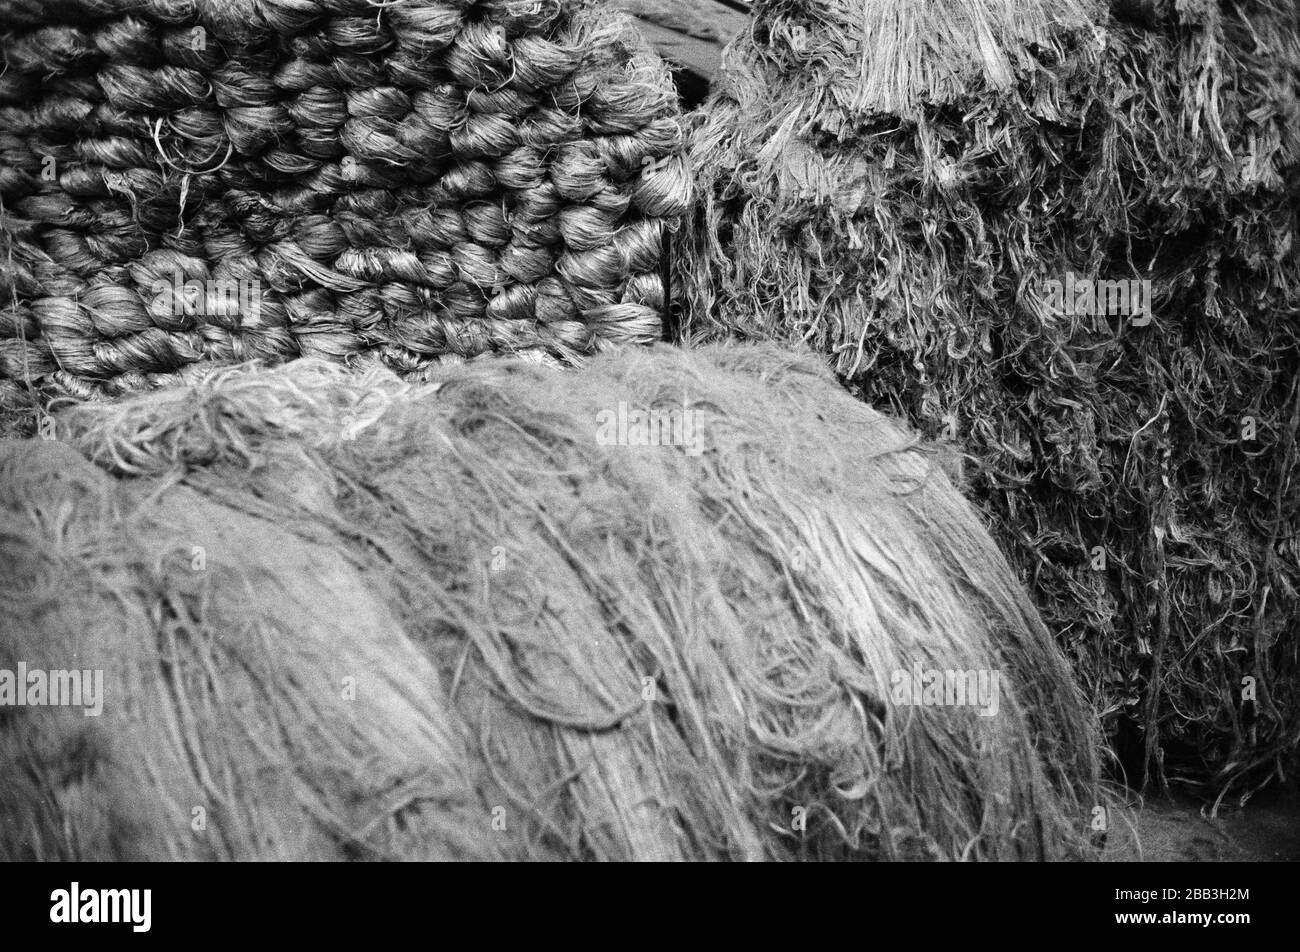 Bales of newly-arrived jute awaiting processing at Tay Spinners mill in Dundee, Scotland. This factory was the last jute spinning mill in Europe when it closed for the final time in 1998. The city of Dundee had been famous throughout history for the three 'Js' - jute, jam and journalism. Stock Photo